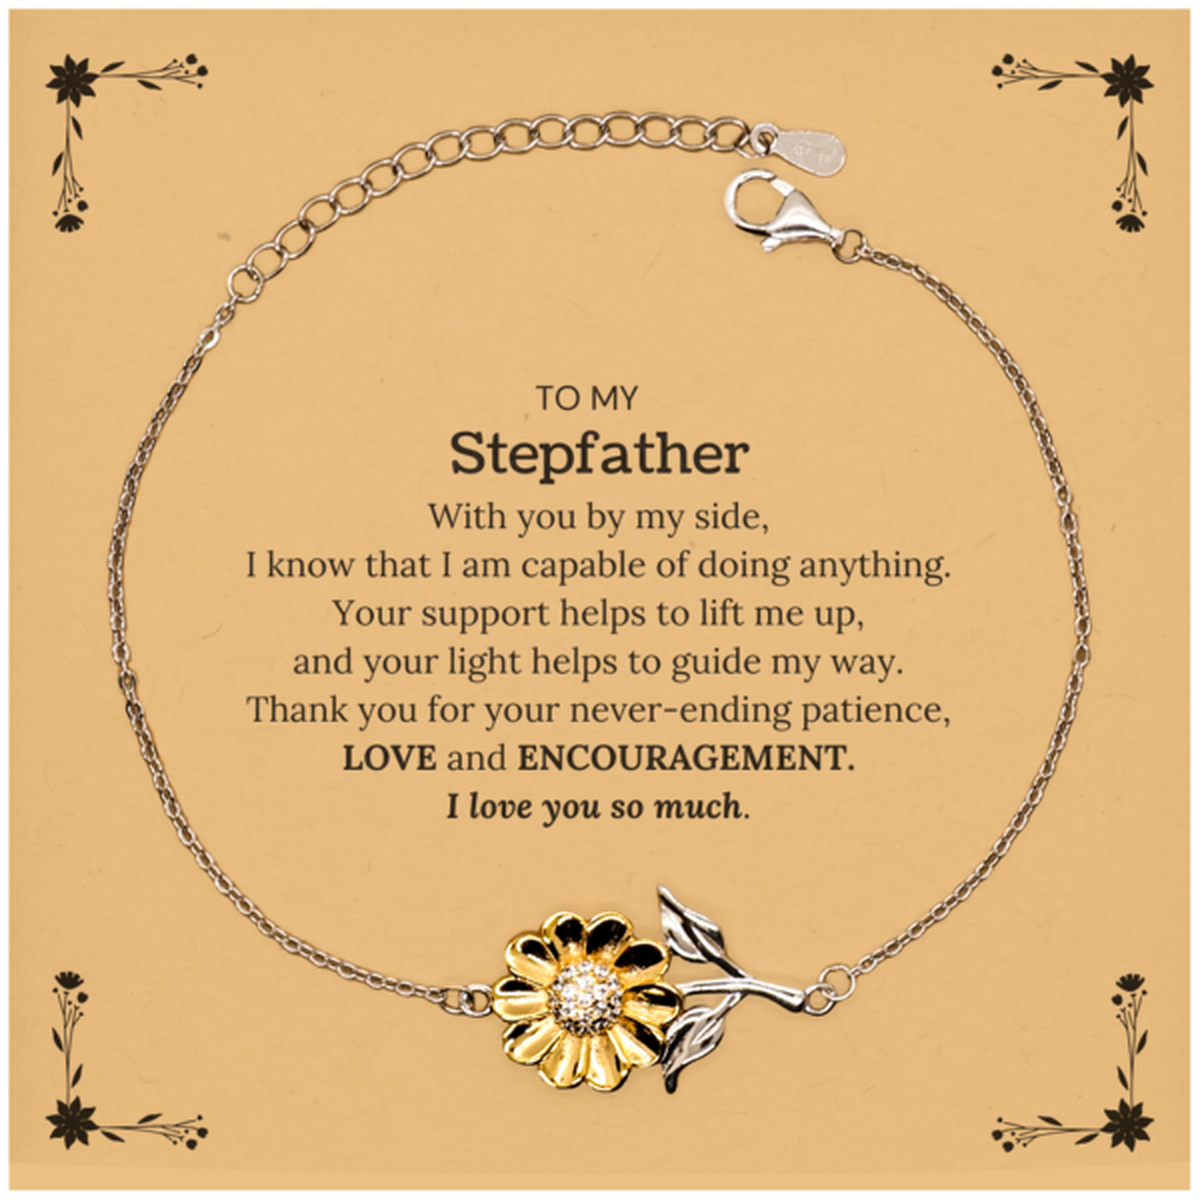 Appreciation Stepfather Sunflower Bracelet Gifts, To My Stepfather Birthday Christmas Wedding Keepsake Gifts for Stepfather With you by my side, I know that I am capable of doing anything. I love you so much